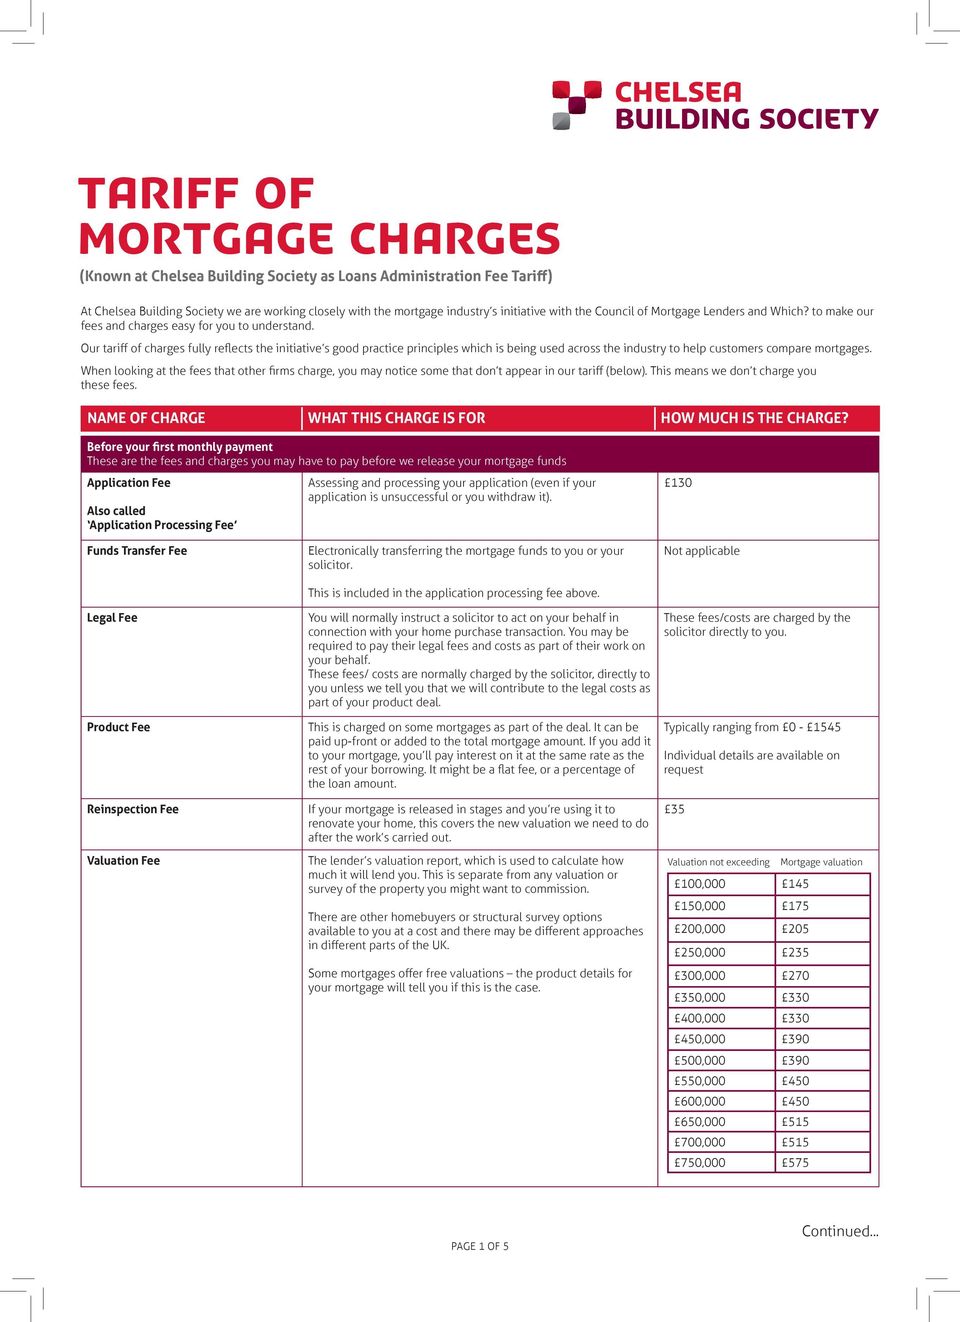 Our tariff of charges fully reflects the initiative s good practice principles which is being used across the industry to help customers compare mortgages.